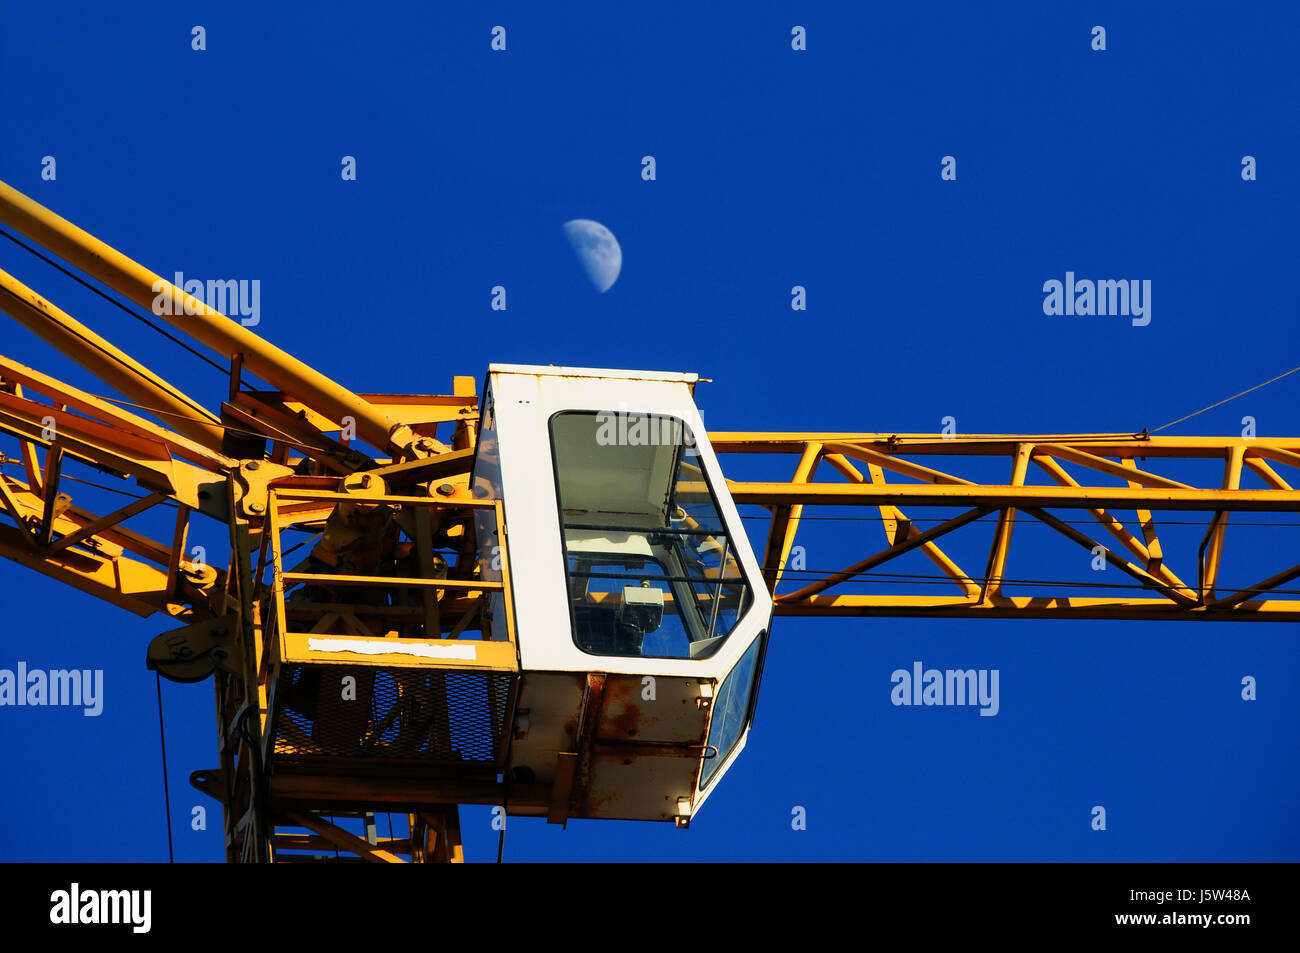 tool detail admission machines crane blue tool industry harbor steel harbours Stock Photo